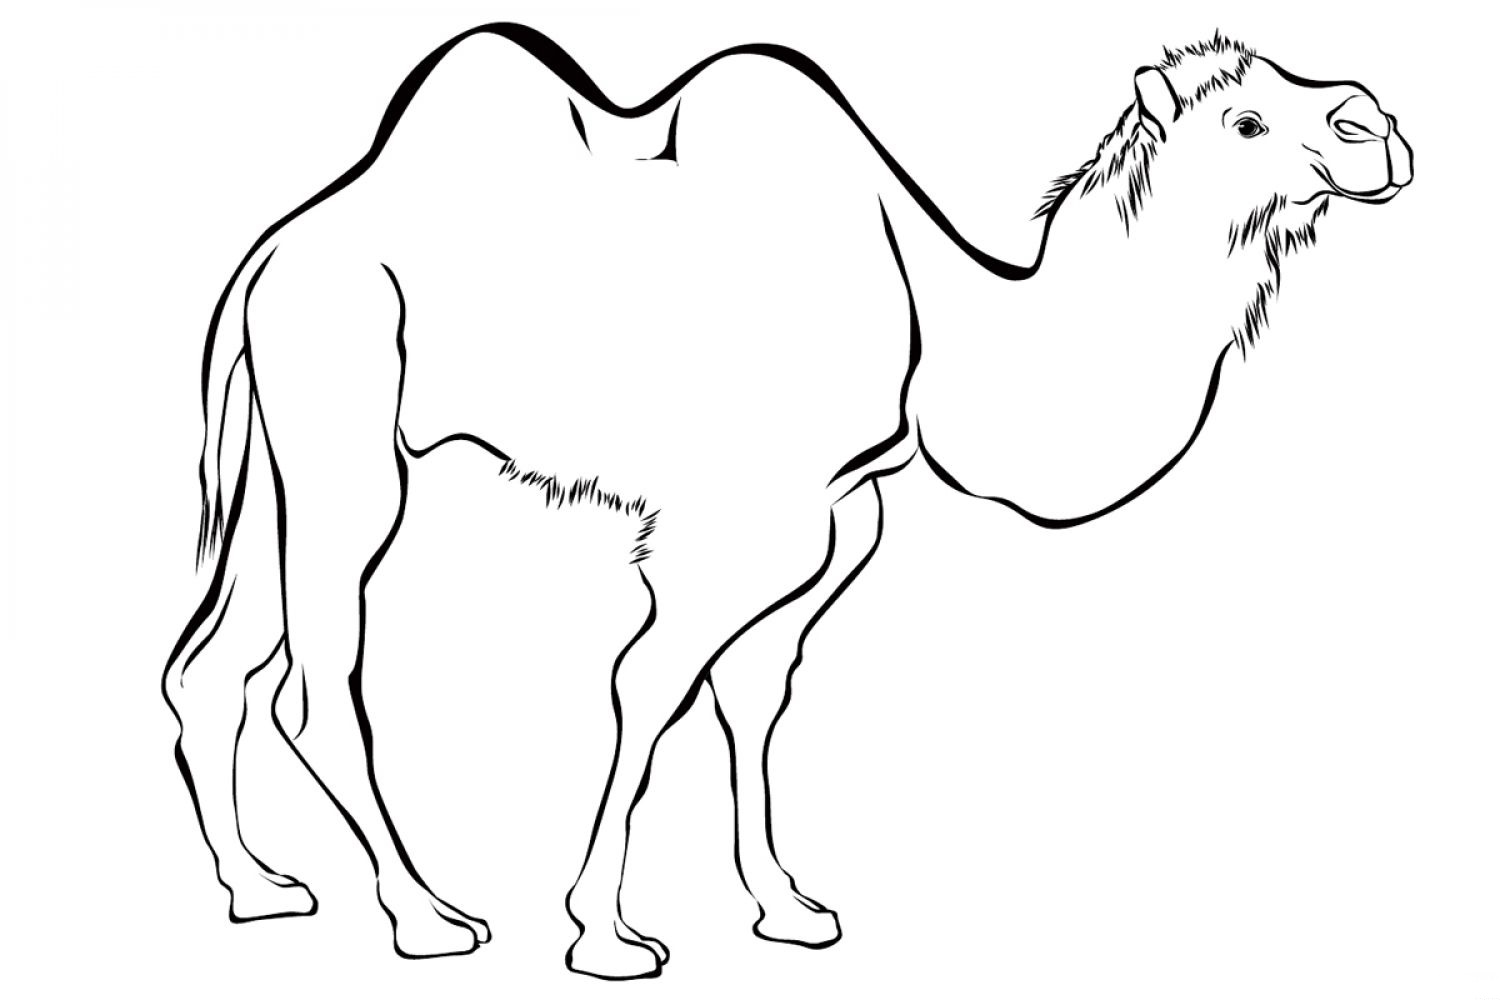 How to draw a Camel - in easy steps for children, kids, beginners - YouTube